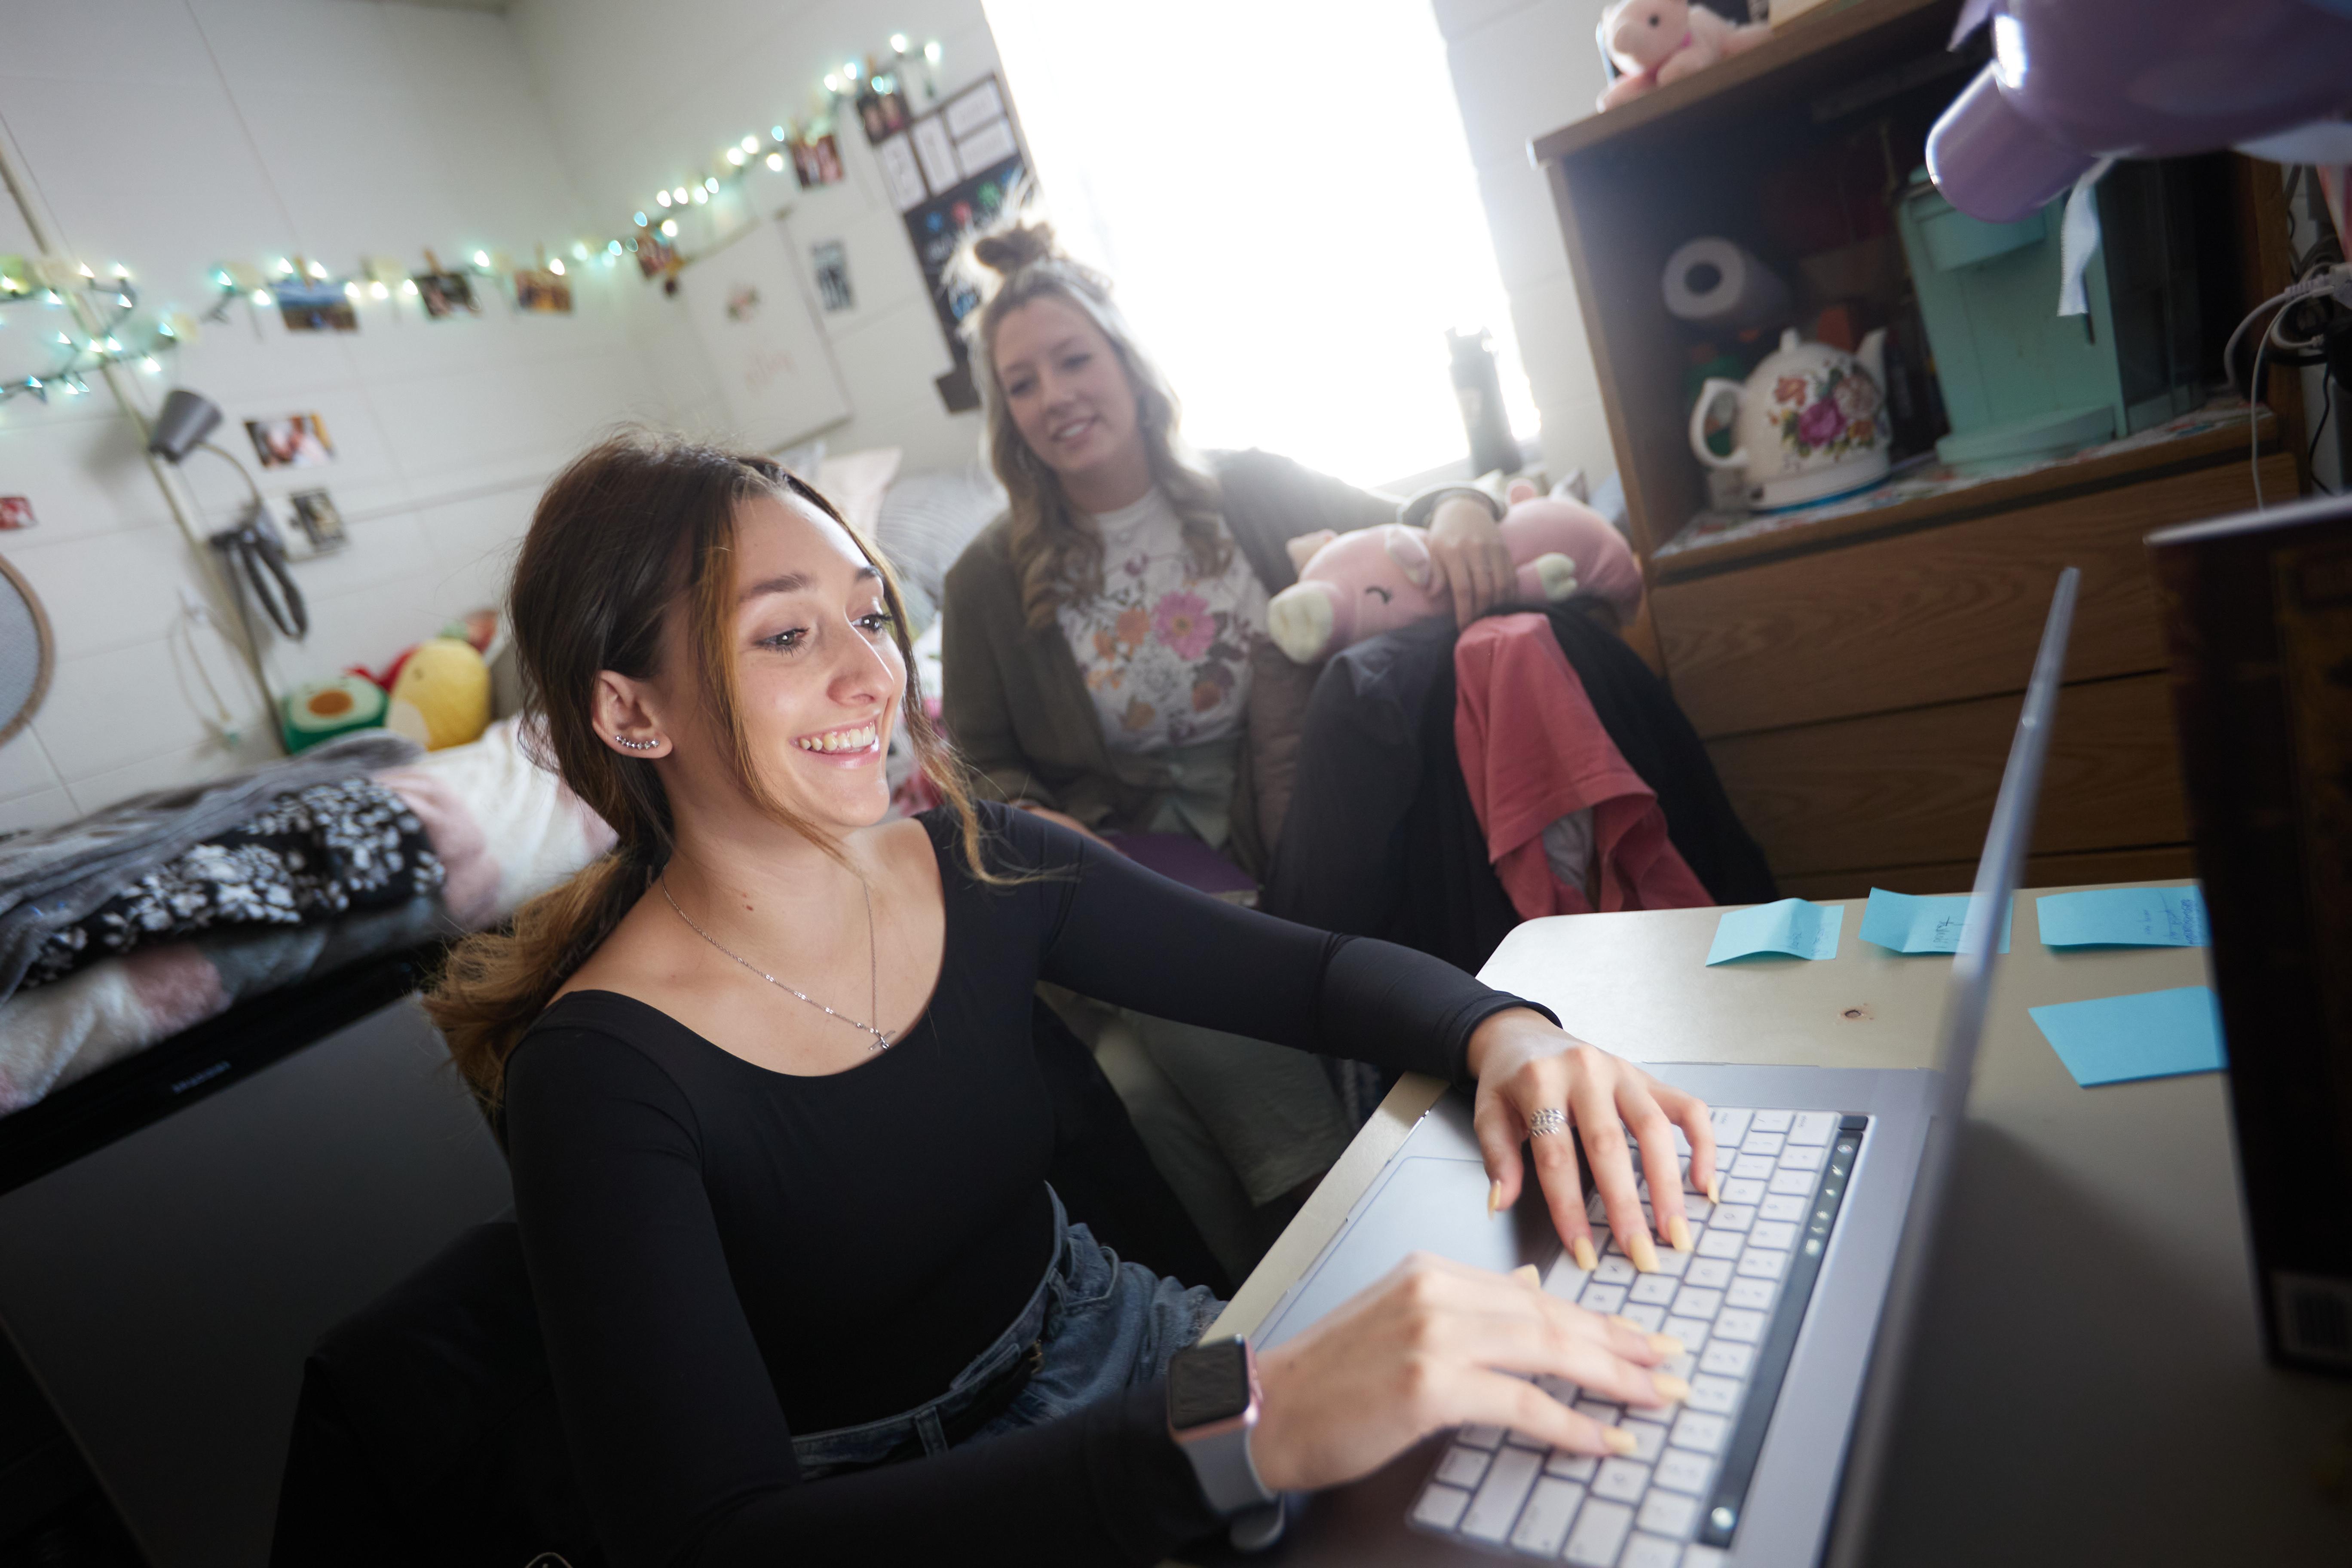 Female student using computer in dorm room